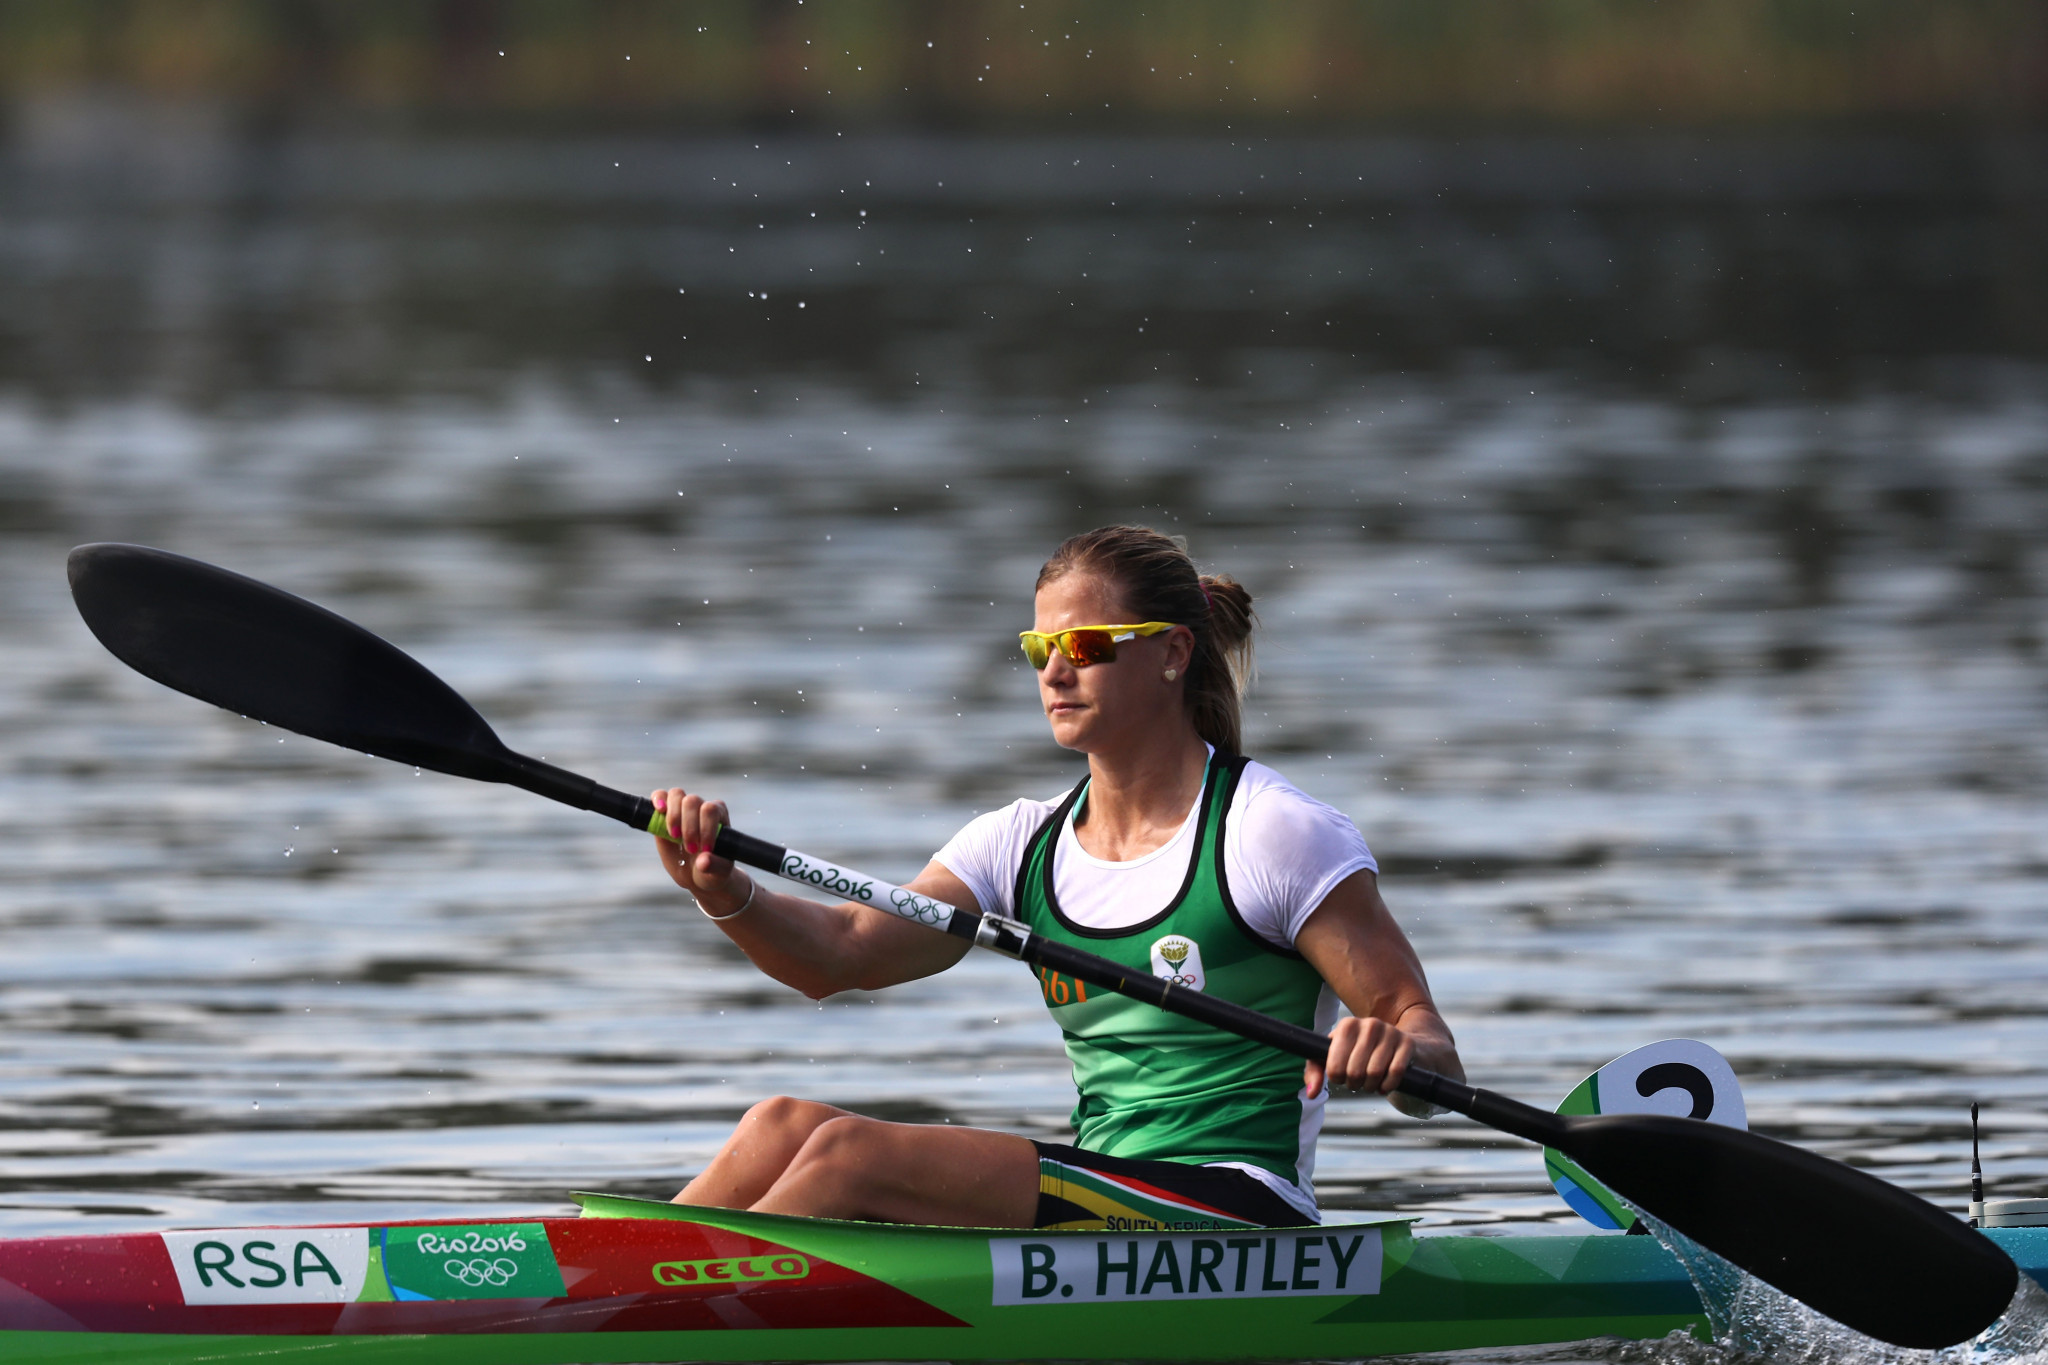 Bridgitte Hartley won Olympic bronze at London 2012 and is a three-time World Championships medallist ©Getty Images